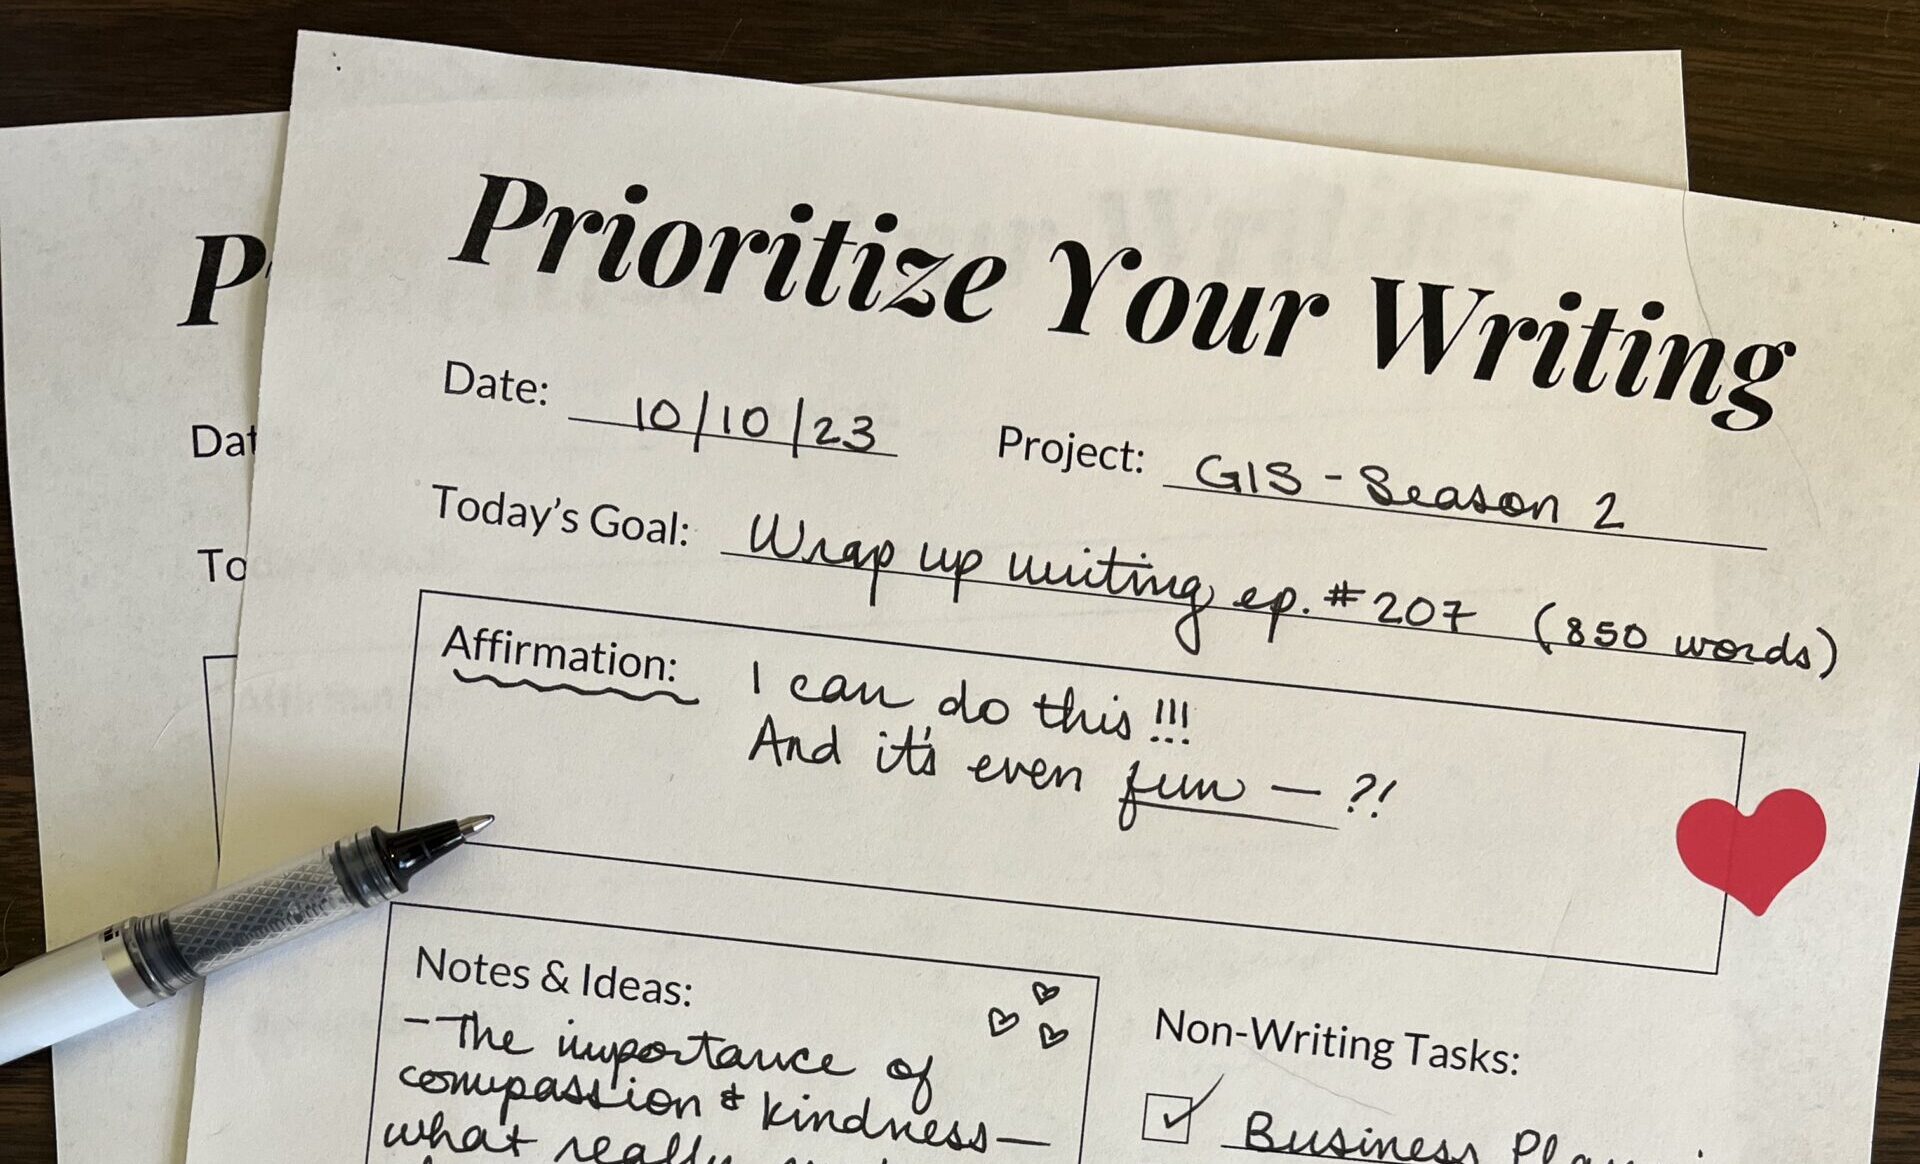 Image of the Prioritize Your Writing worksheet